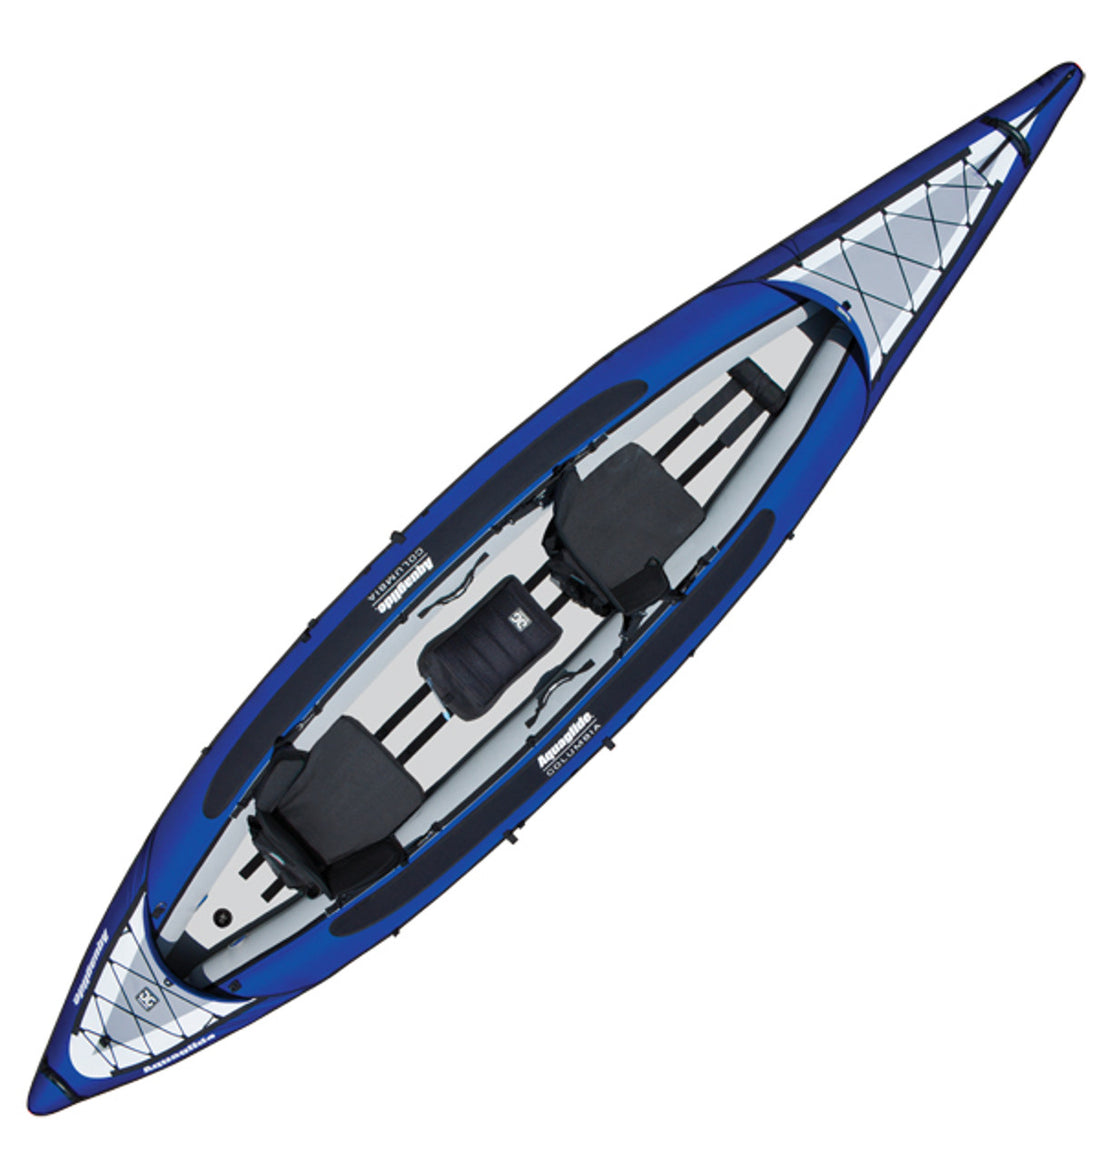 Lower AquaGlide Columbia XP Inflatable Kayak Prices for 2016